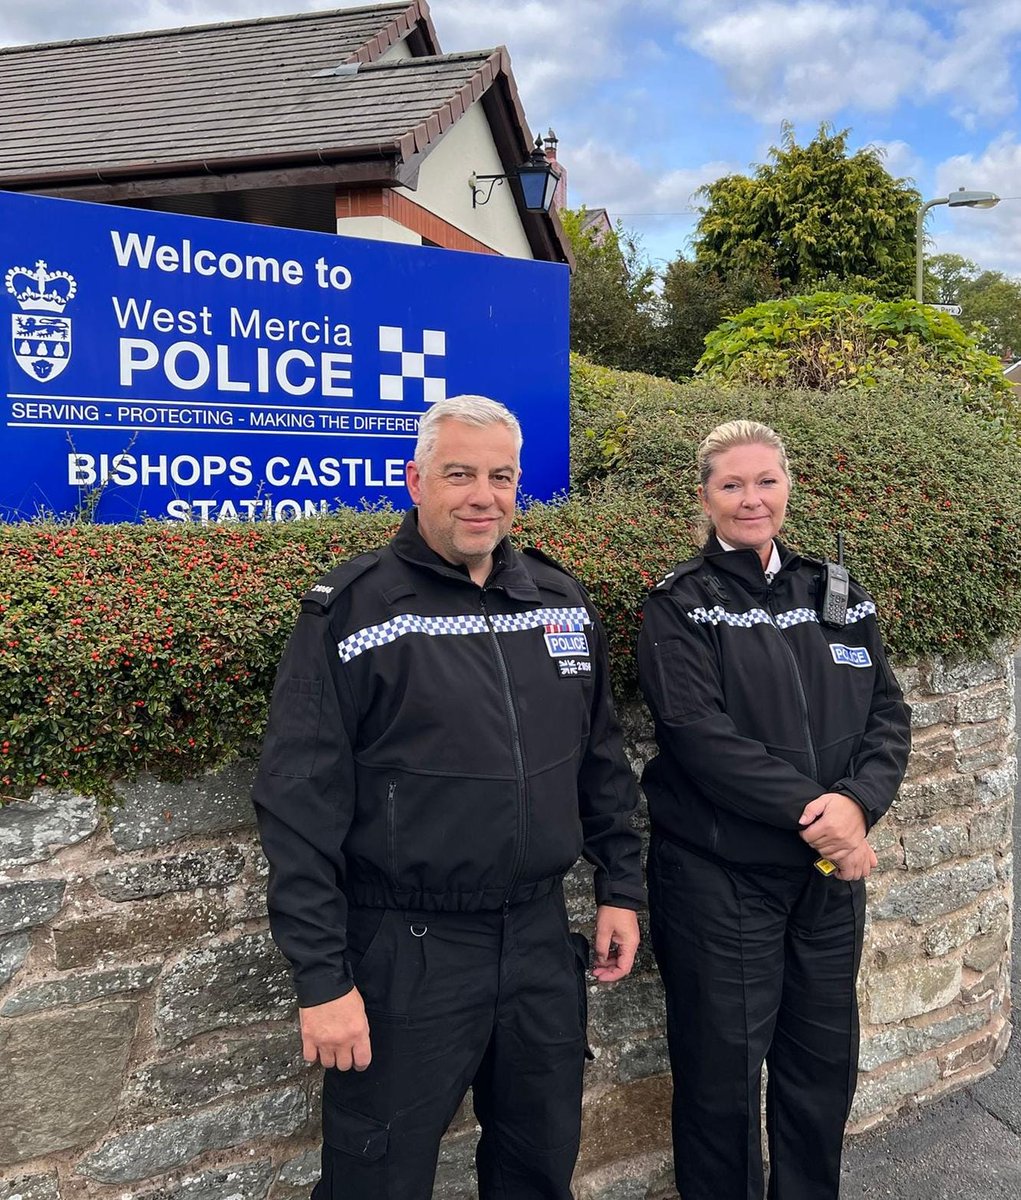 Morning spent with Sgts discussing how we can improve on our diversity, equality and inclusivity in South Shropshire. Afternoon welcoming PC Matt Howell into his new post at Bishops Castle.